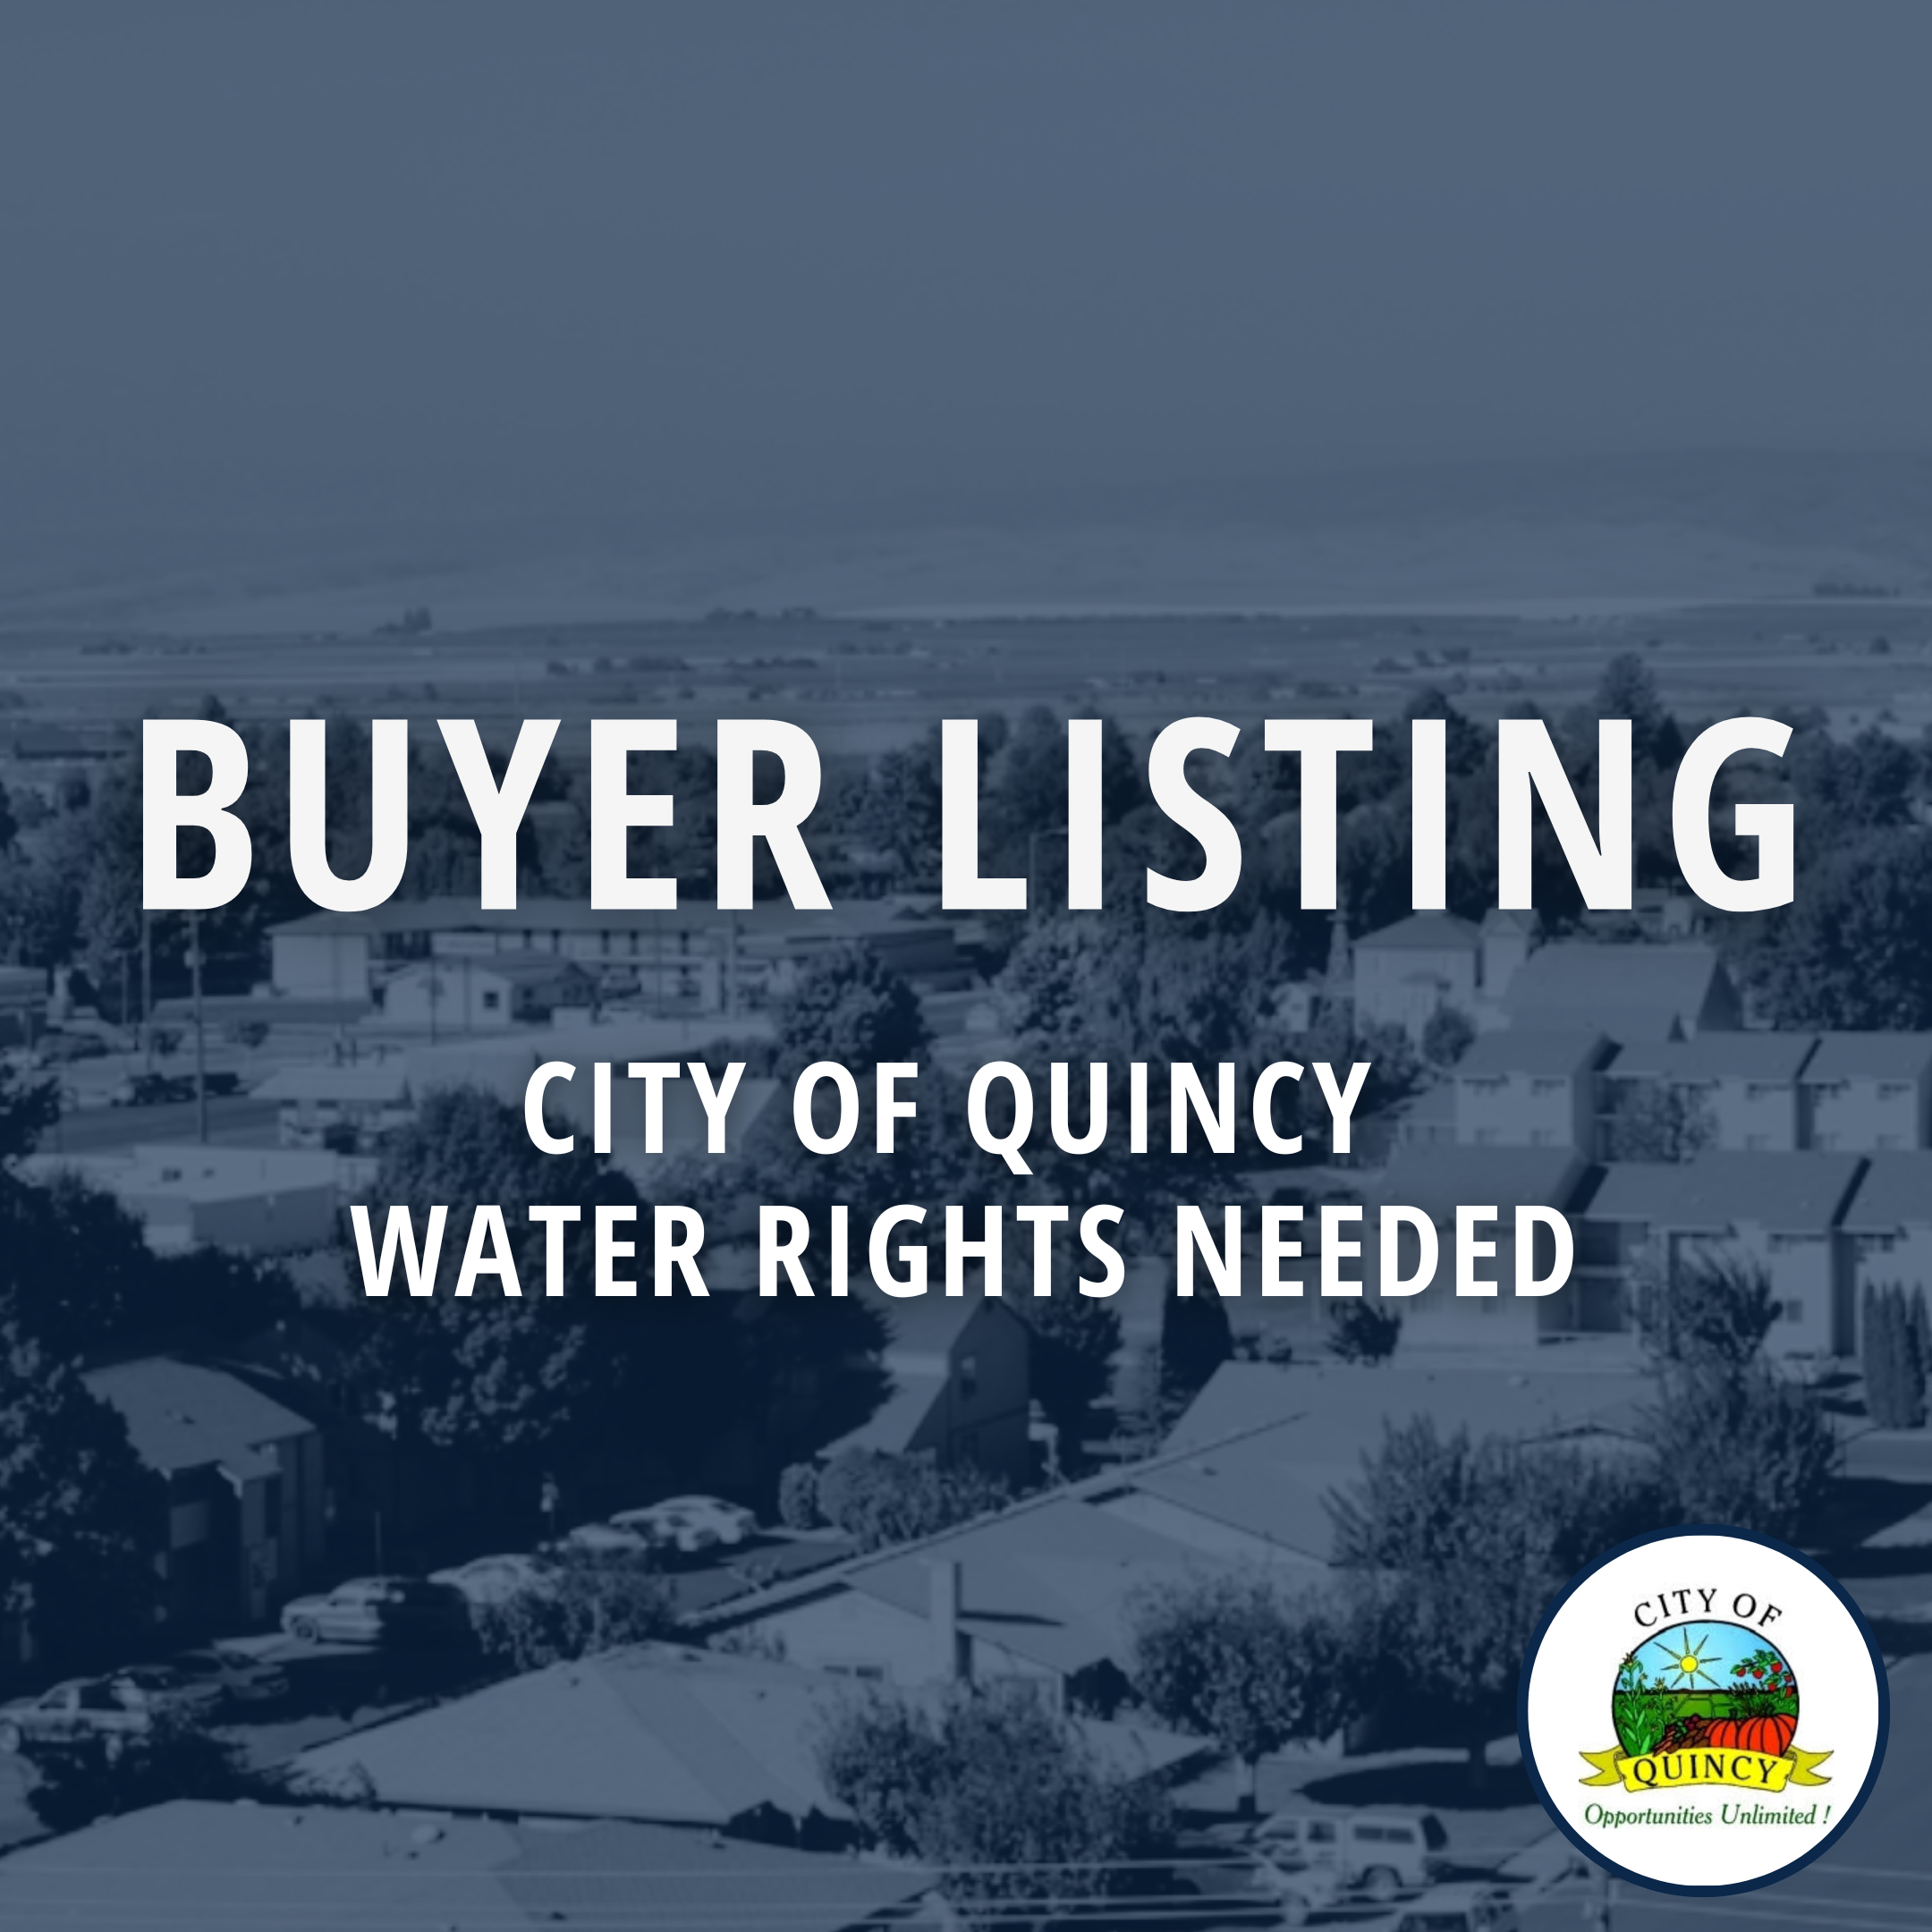 City of Quincy Water Rights Needed